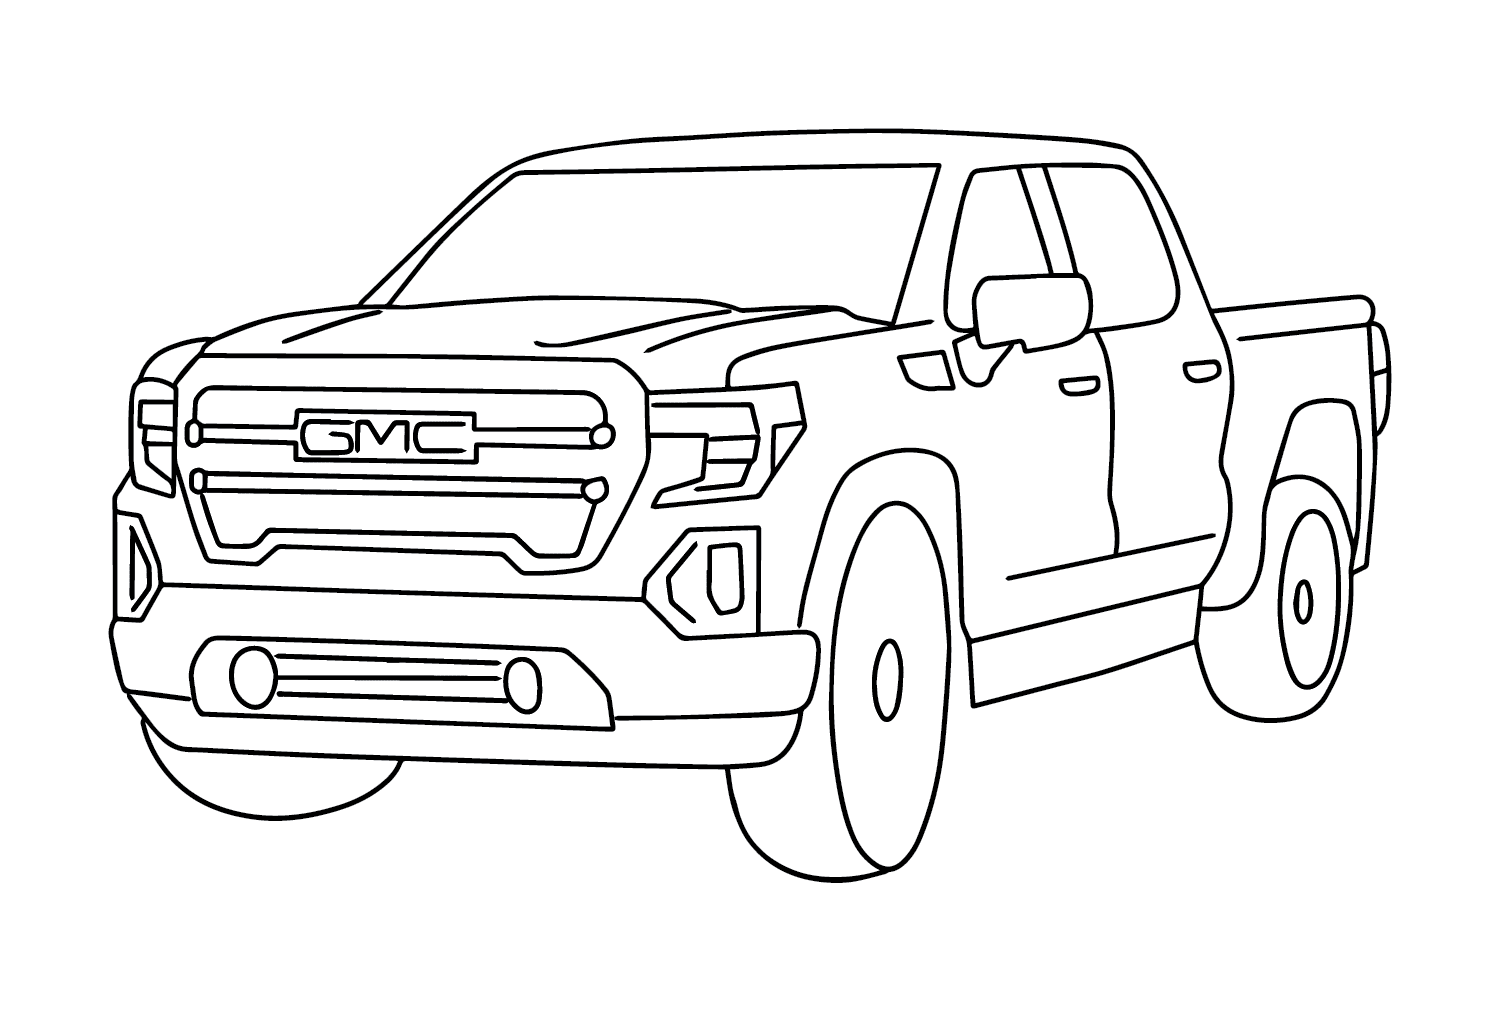 Gmc coloring pages